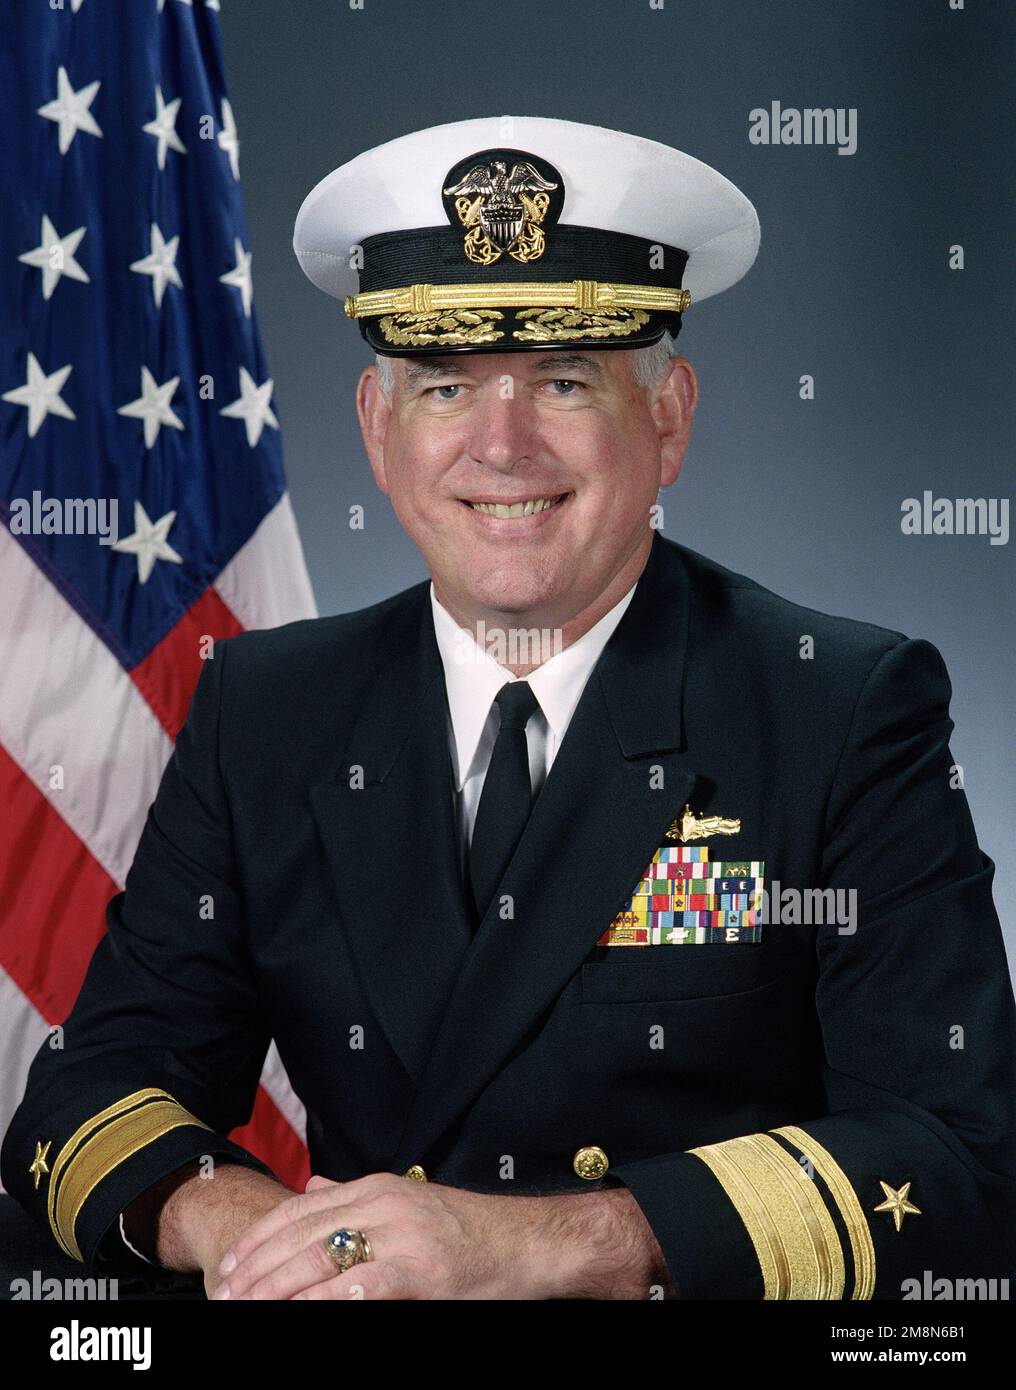 United States Navy Foto ufficiale di RADM (Upper Half, Line) William W. Cobb Jr., Program Executive Officer for Theater Air Defense and Surface Combatants, Assistant Secretary of the Navy for Research, Development and Acquisition. A dicembre 1998. Base: Washington Stato: District of Columbia (DC) Nazione: Stati Uniti d'America (USA) Foto Stock